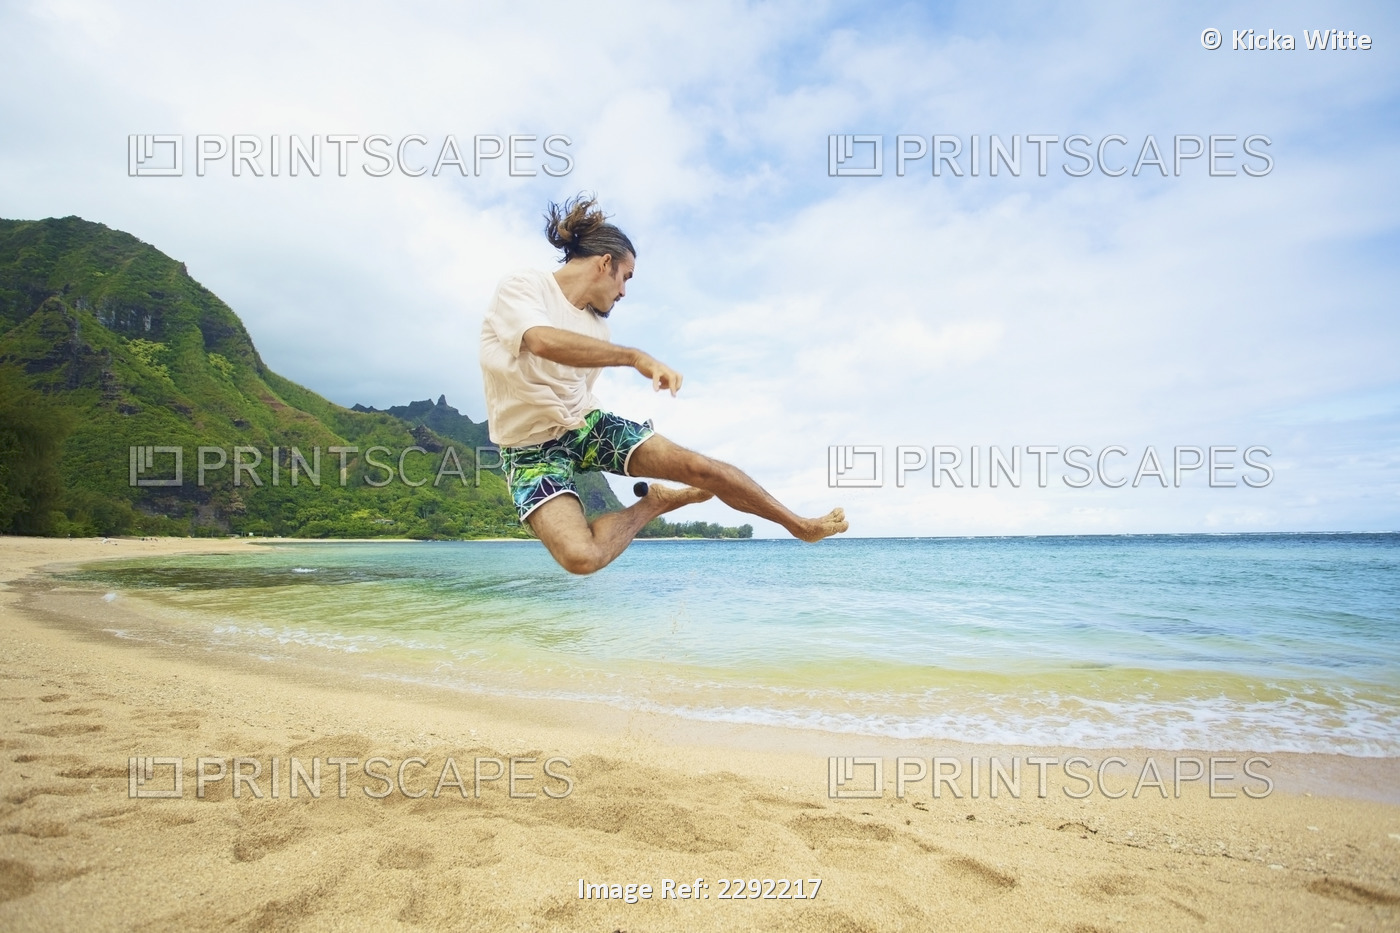 A man takes a leap into the air while playing with a hackey sack on the beach; ...